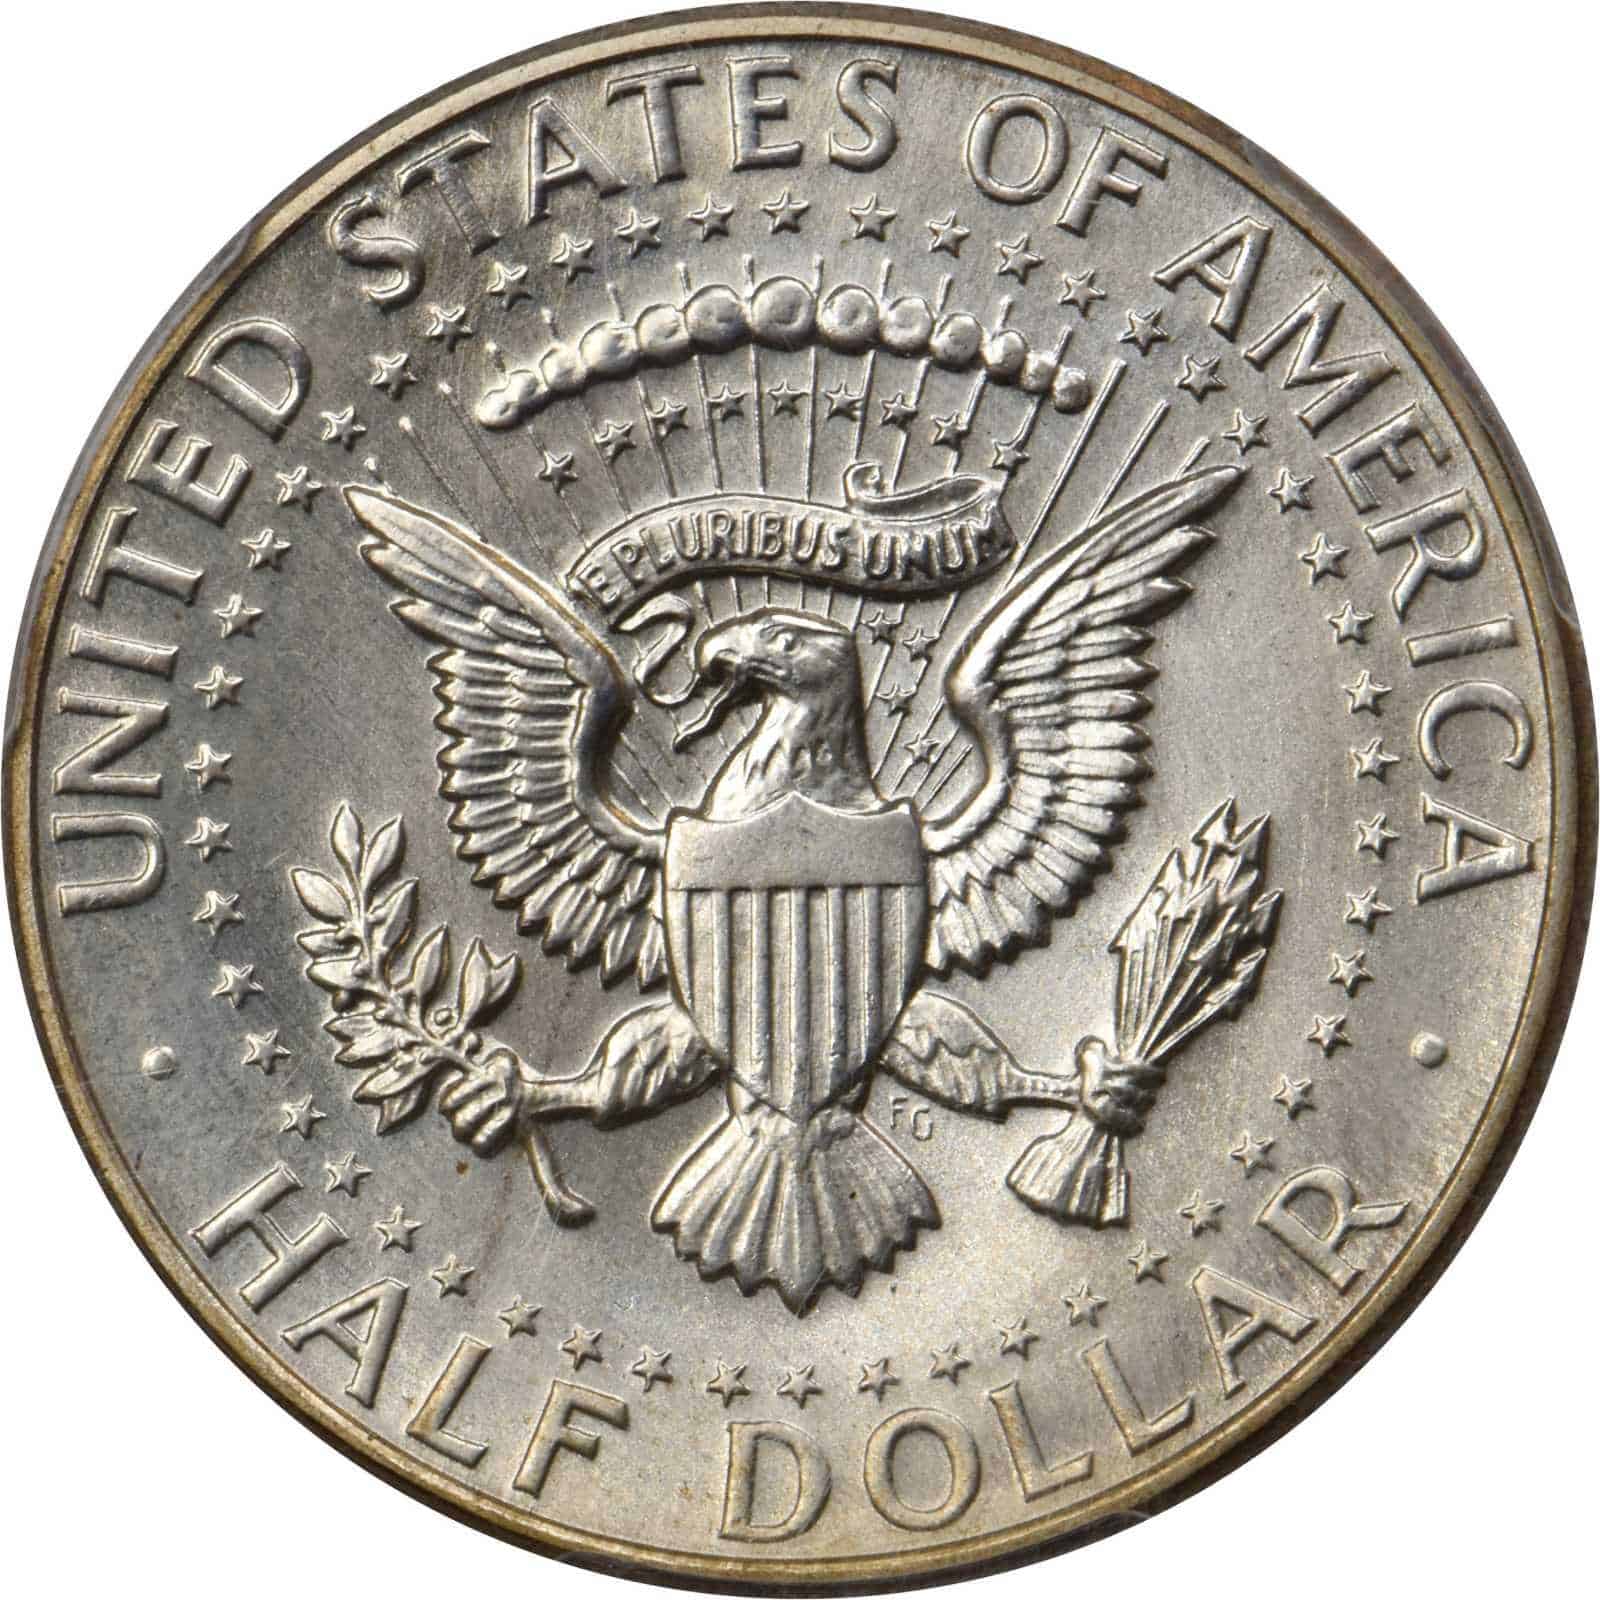 The Reverse of the 1964 Kennedy Half Dollar